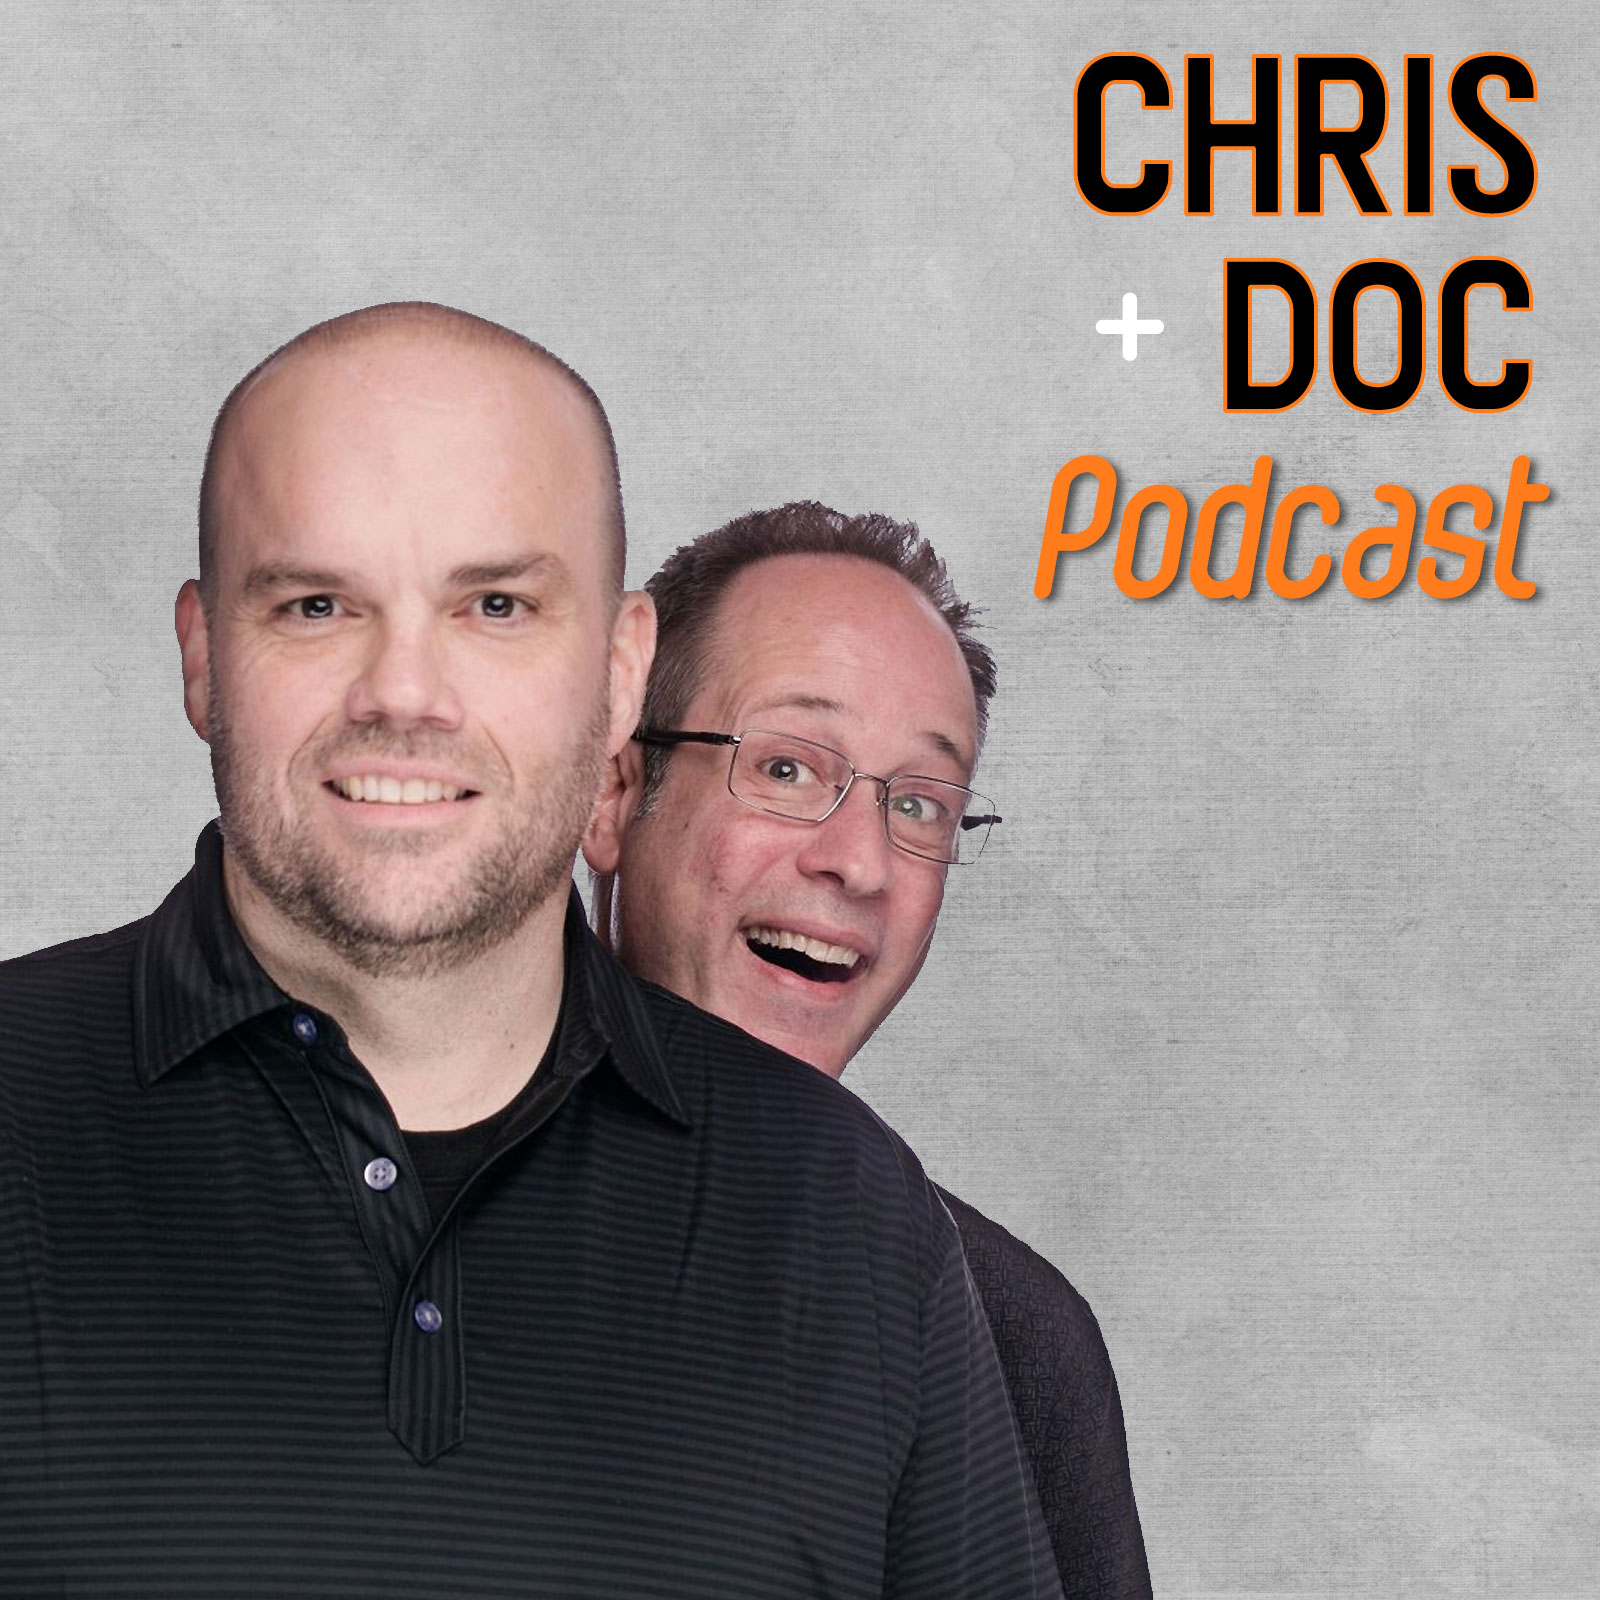 Chris + Doc's BIG Country Podcast